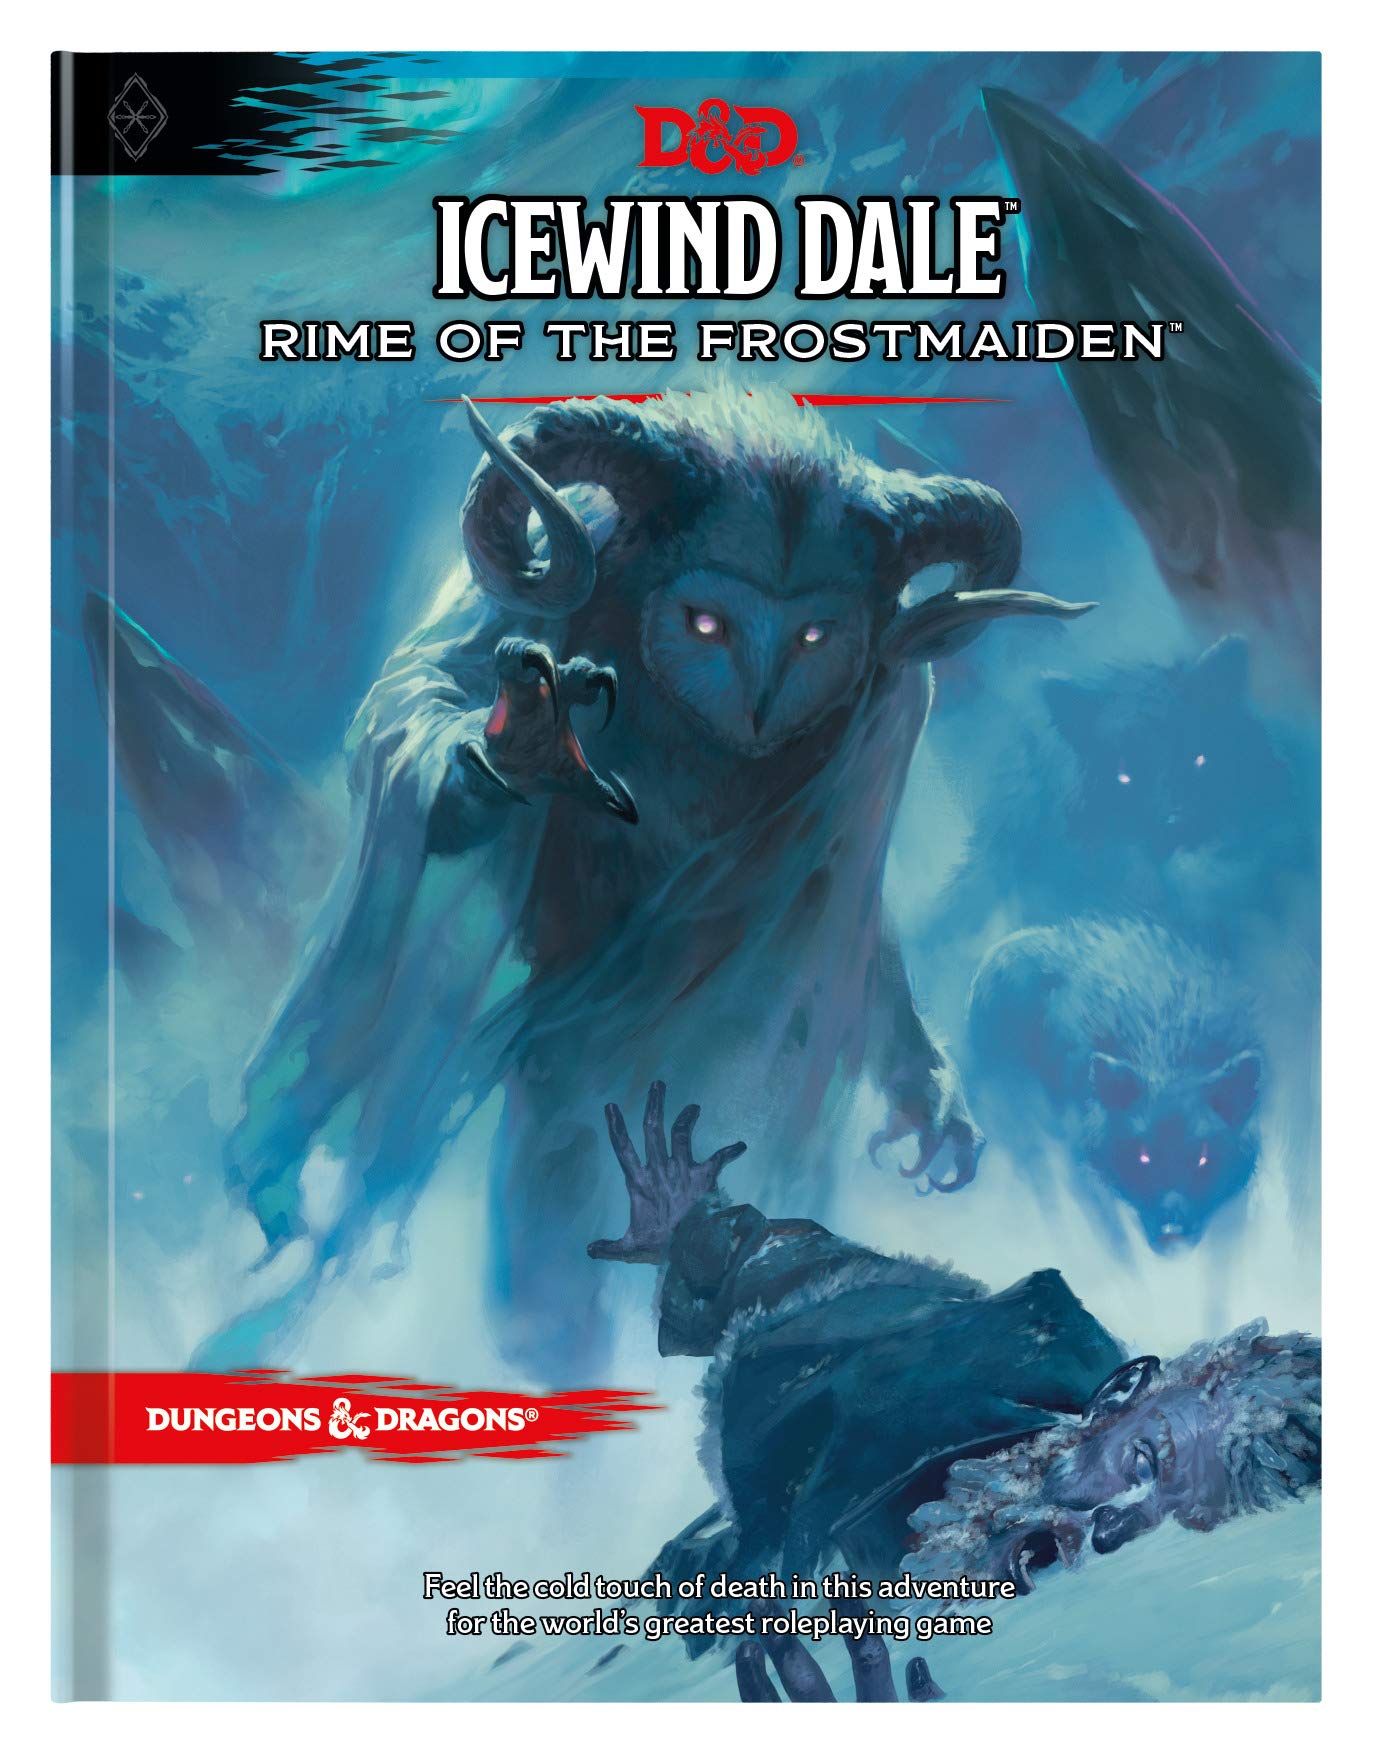 Dungeons & Dragons 5th Edition: Icewind Dale - Rime of the Frostmaiden